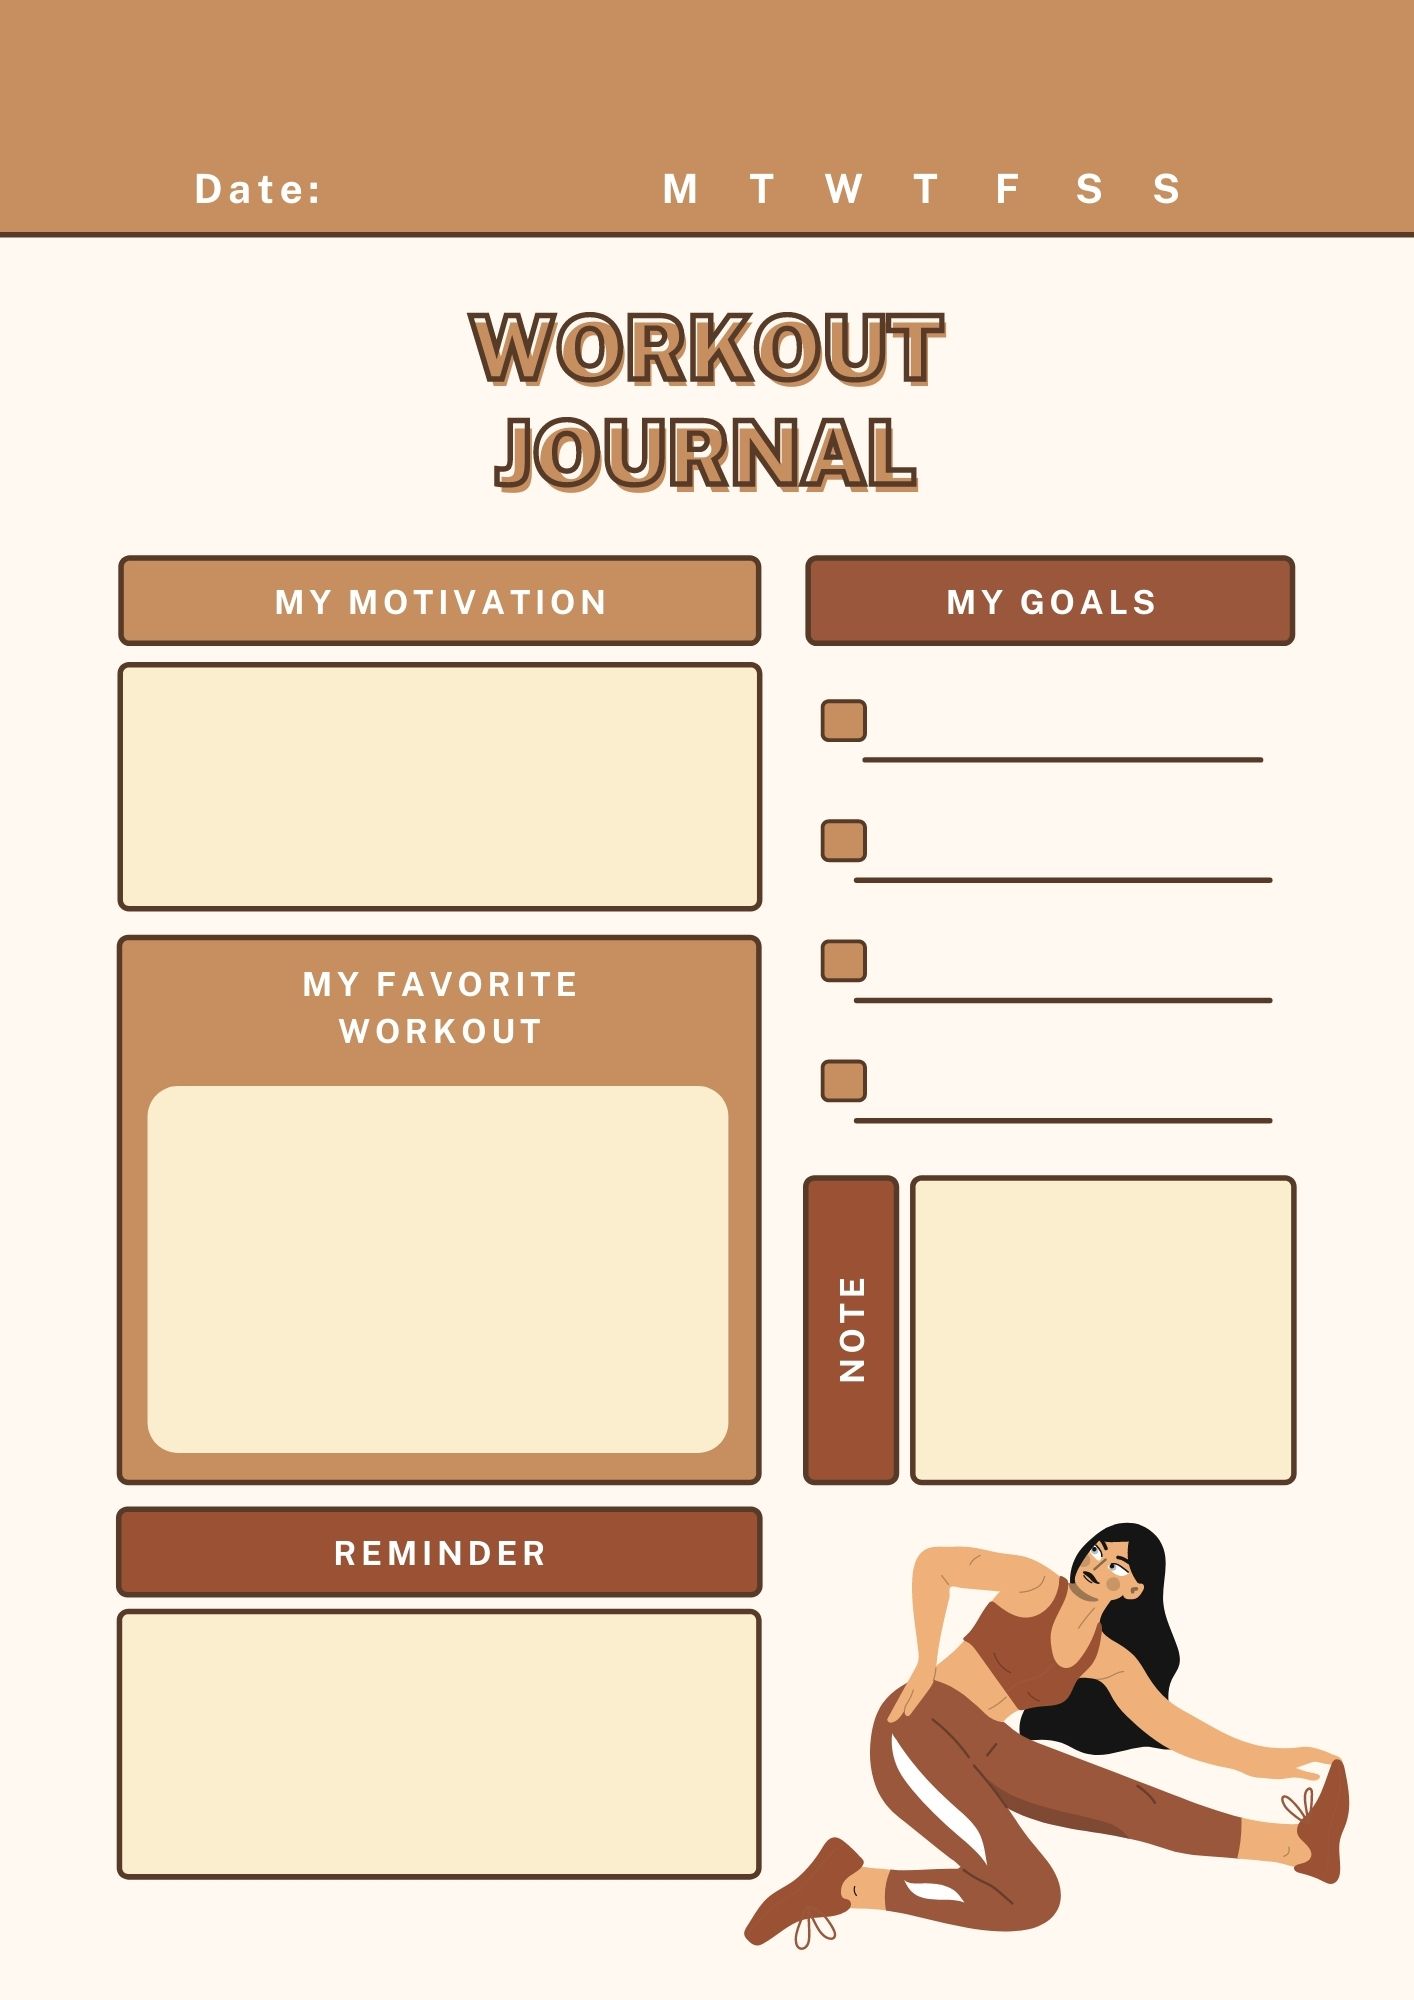 Sample of a Canva Illustration Workout Journal Template available for free download